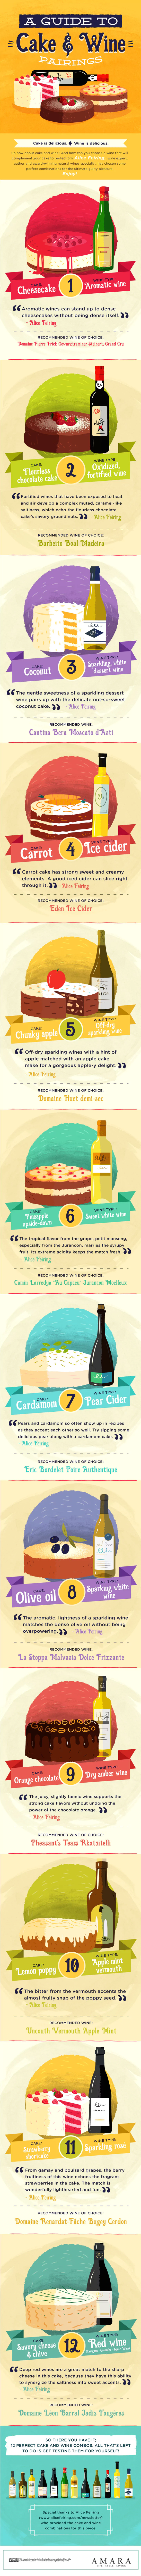 A Guide to Cake and Wine Pairings